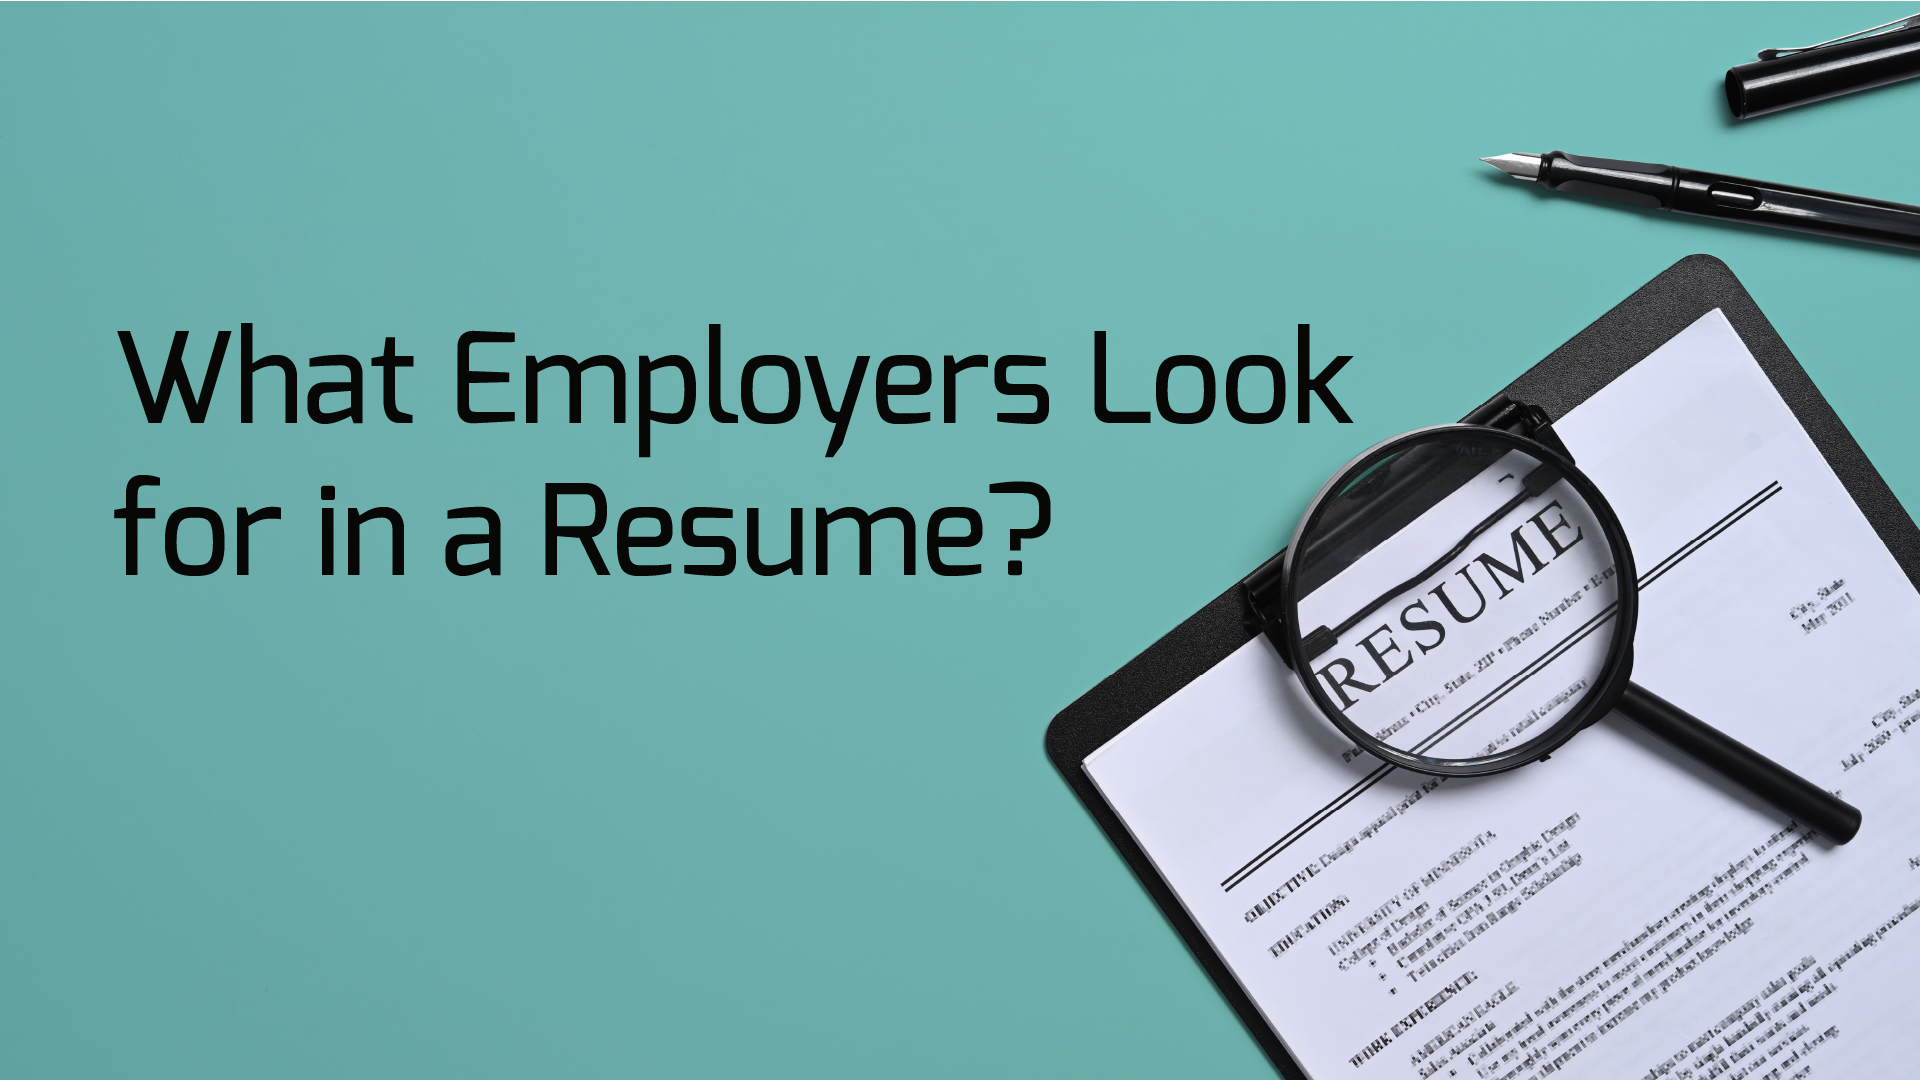 What Employers Look for in a Resume?